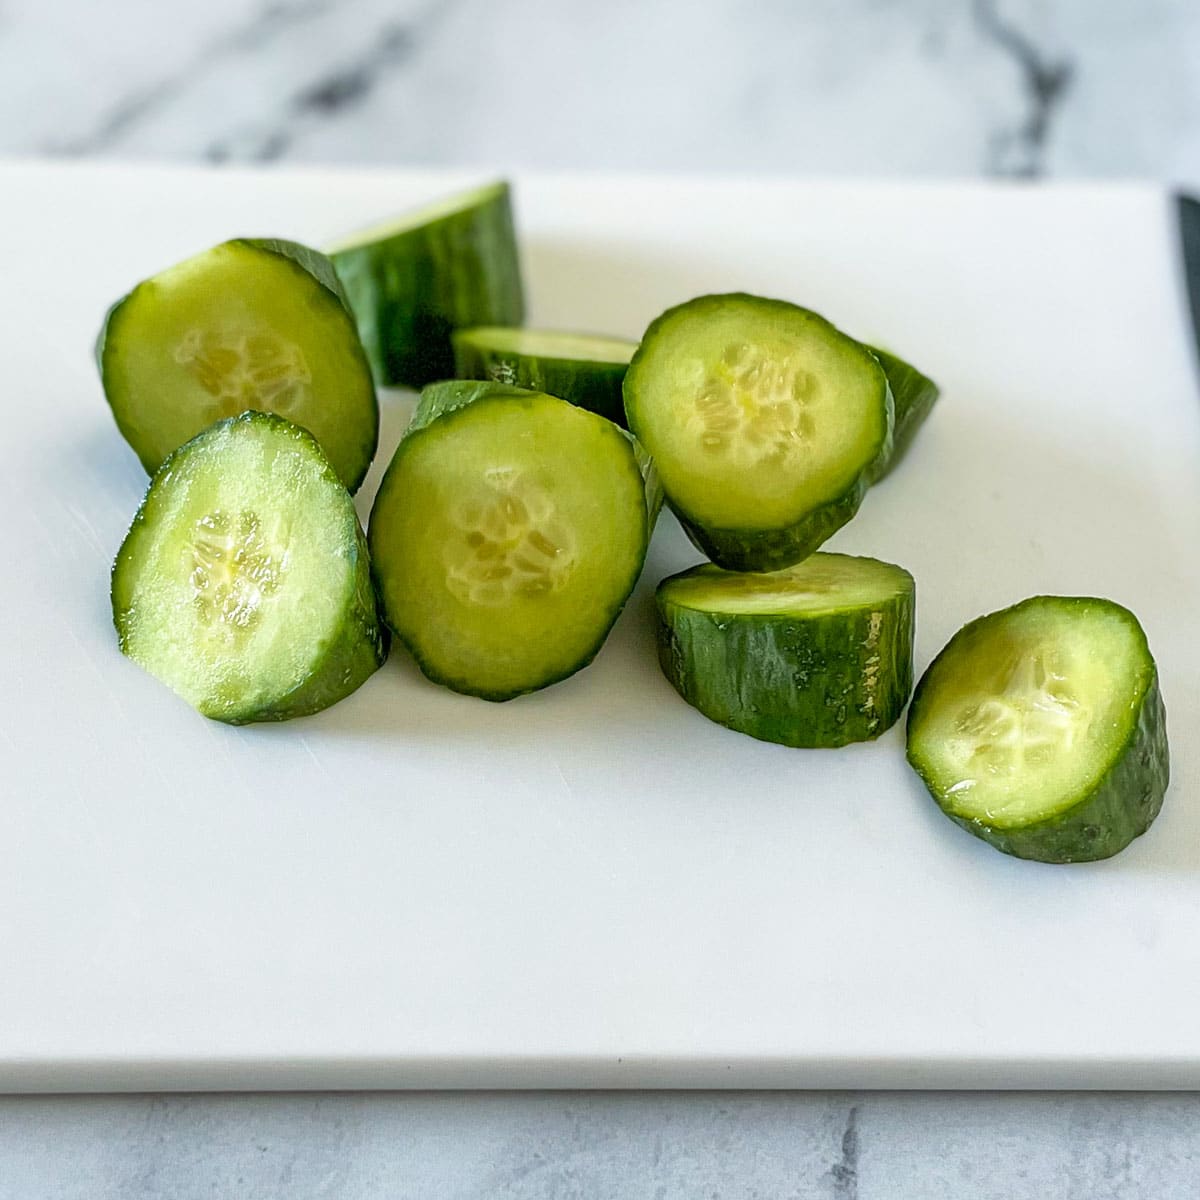 Cucumbers are shown cut into triangular wedges.